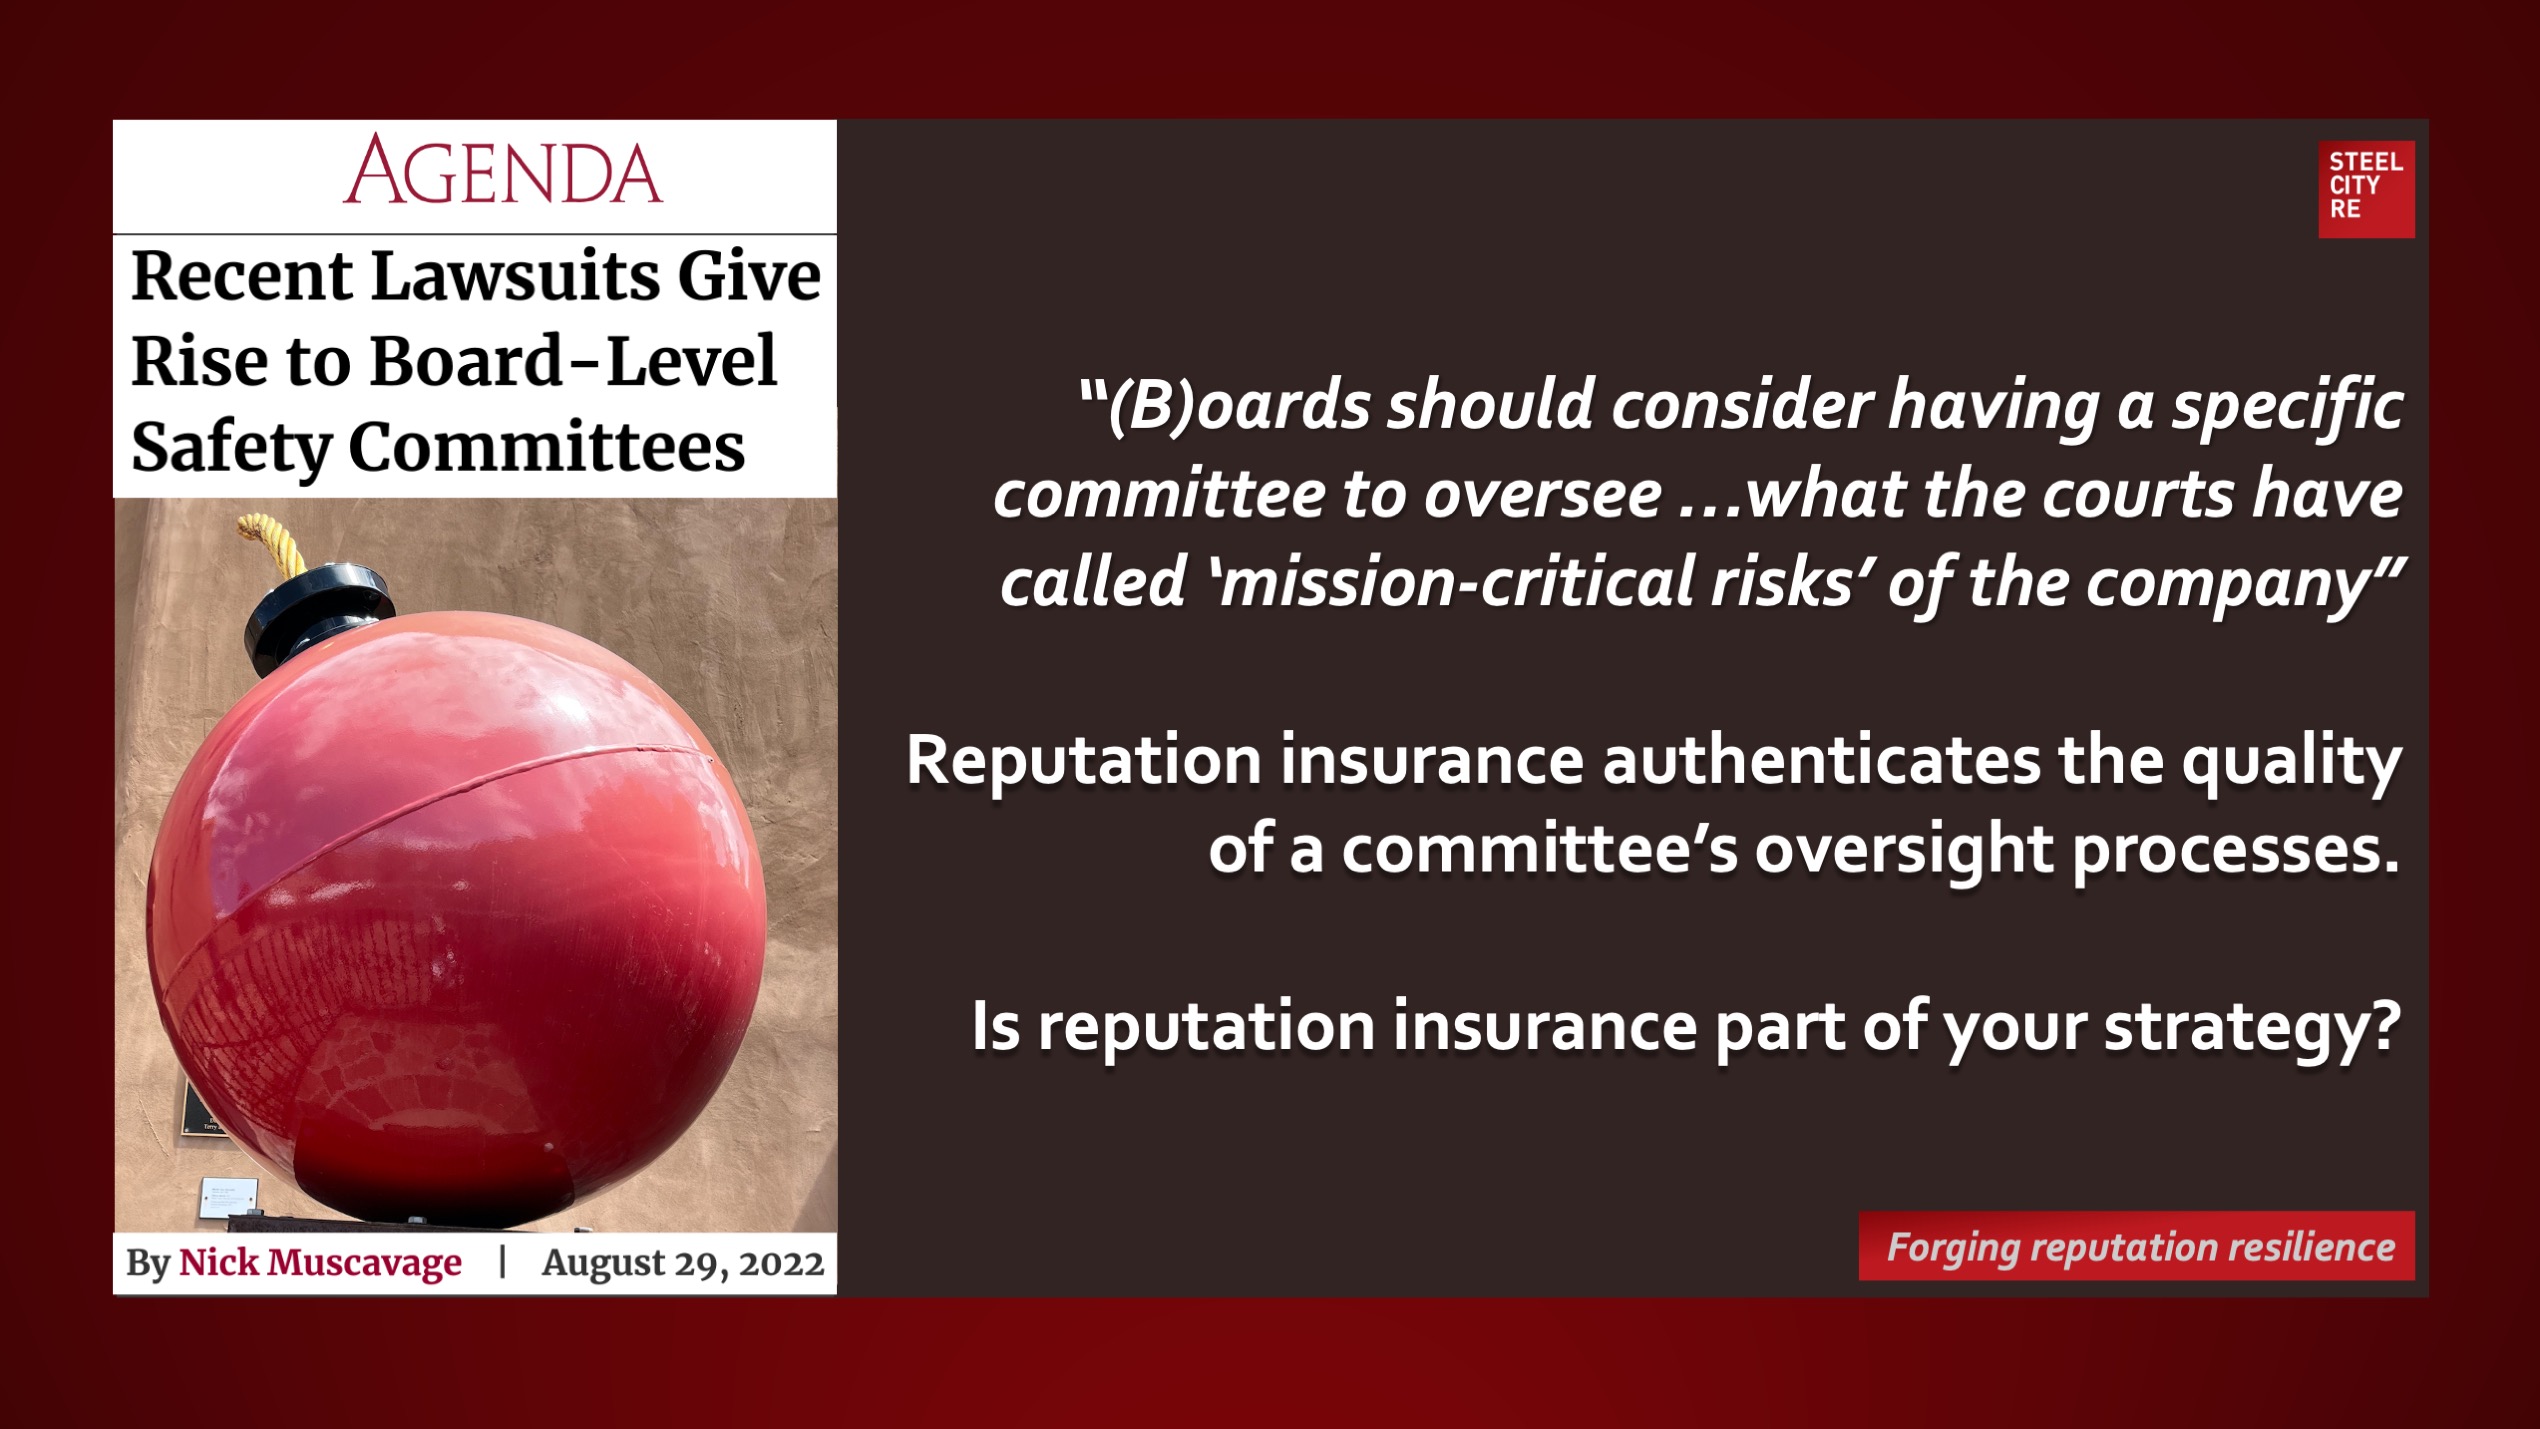 Greenwashing to some stakeholders? Reputation insurance authenticates the quality of a committee’s oversight processes.